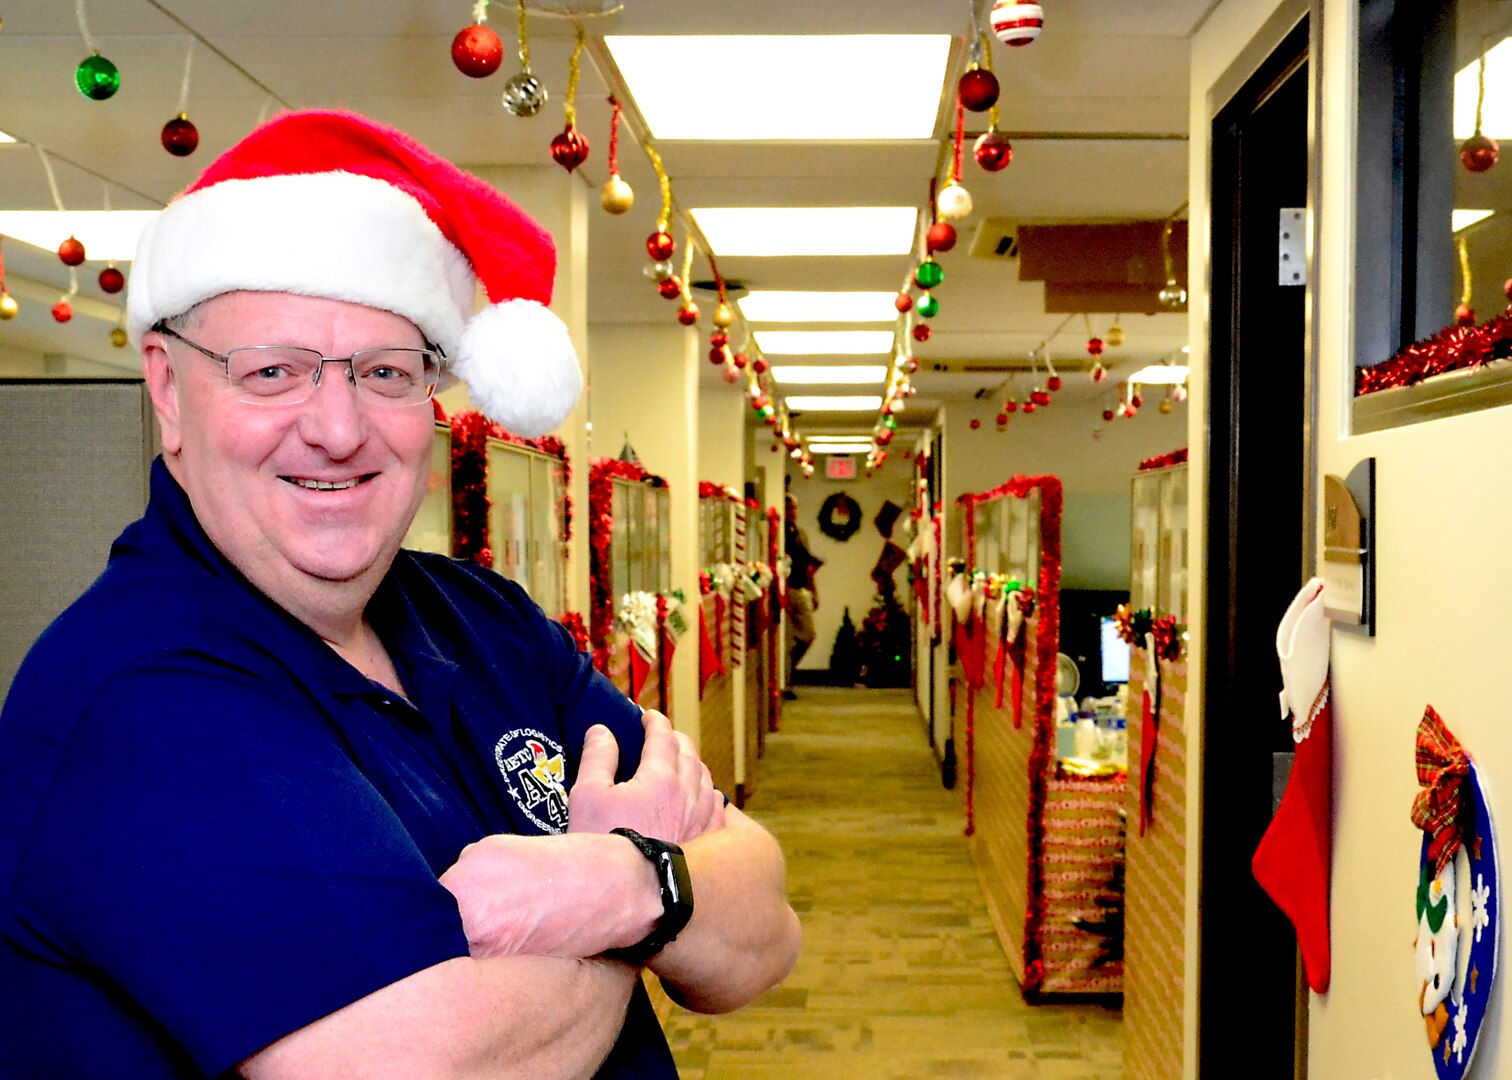 Marc Collette, Headquarters Air Education Training Command, equipment manager, A4R Logistics and Readiness Division, poses with a decorated office as his backdrop, Dec. 4, 2018 at Joint Base San Antonio, Texas. Collette started this tradition after going through a divorce in 1997 to cheer up his children.